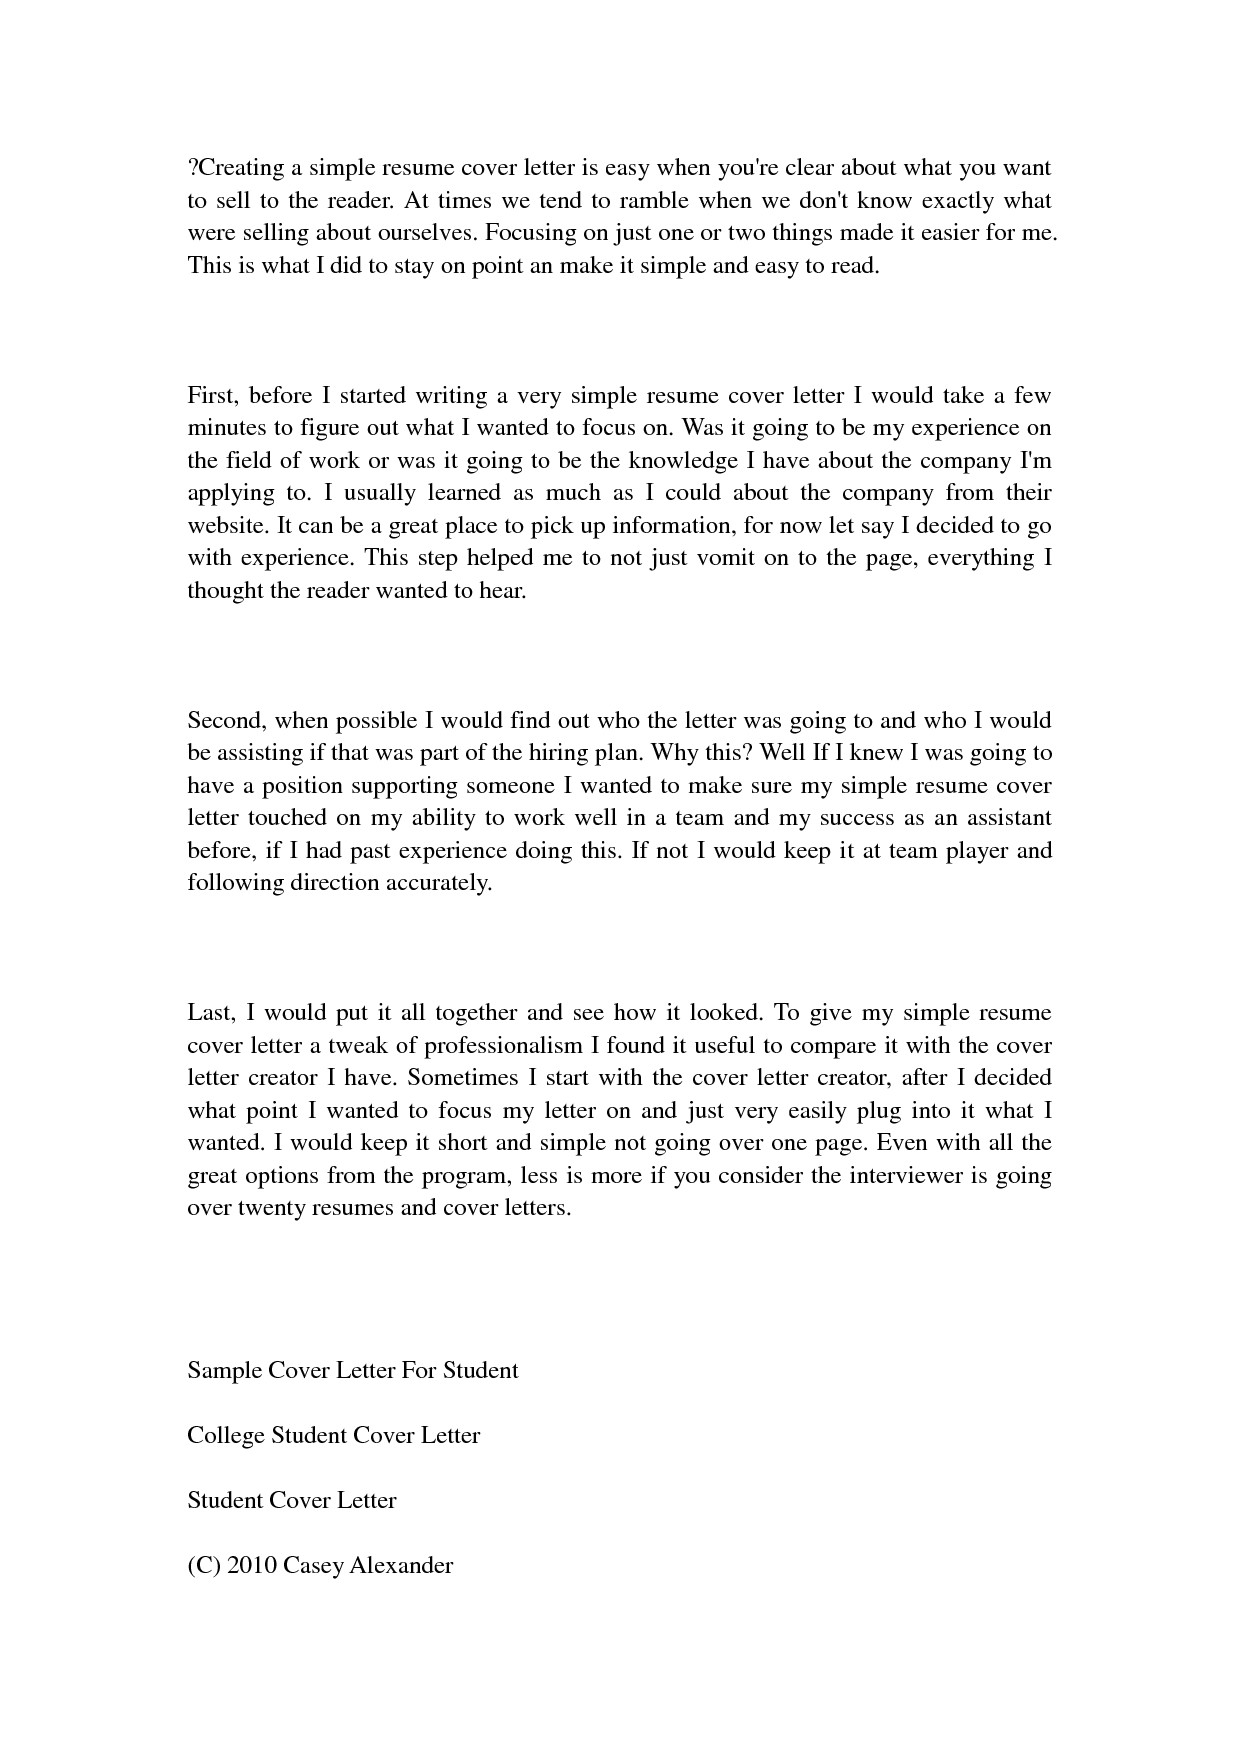 tips on making a cover letter